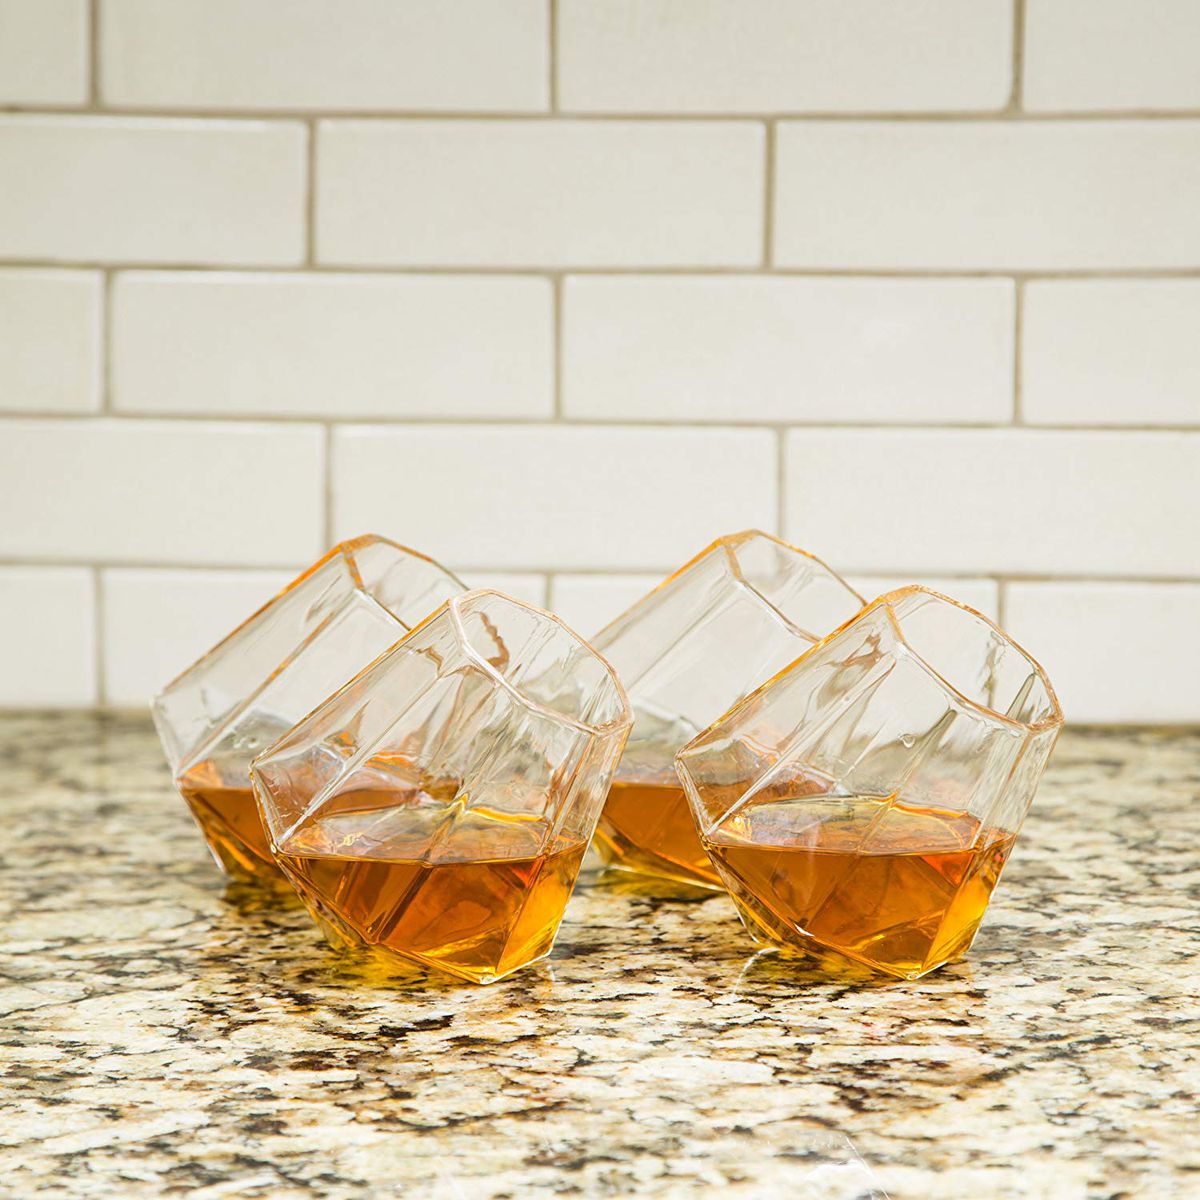 Four diamond whiskey glasses filled partway with whiskey